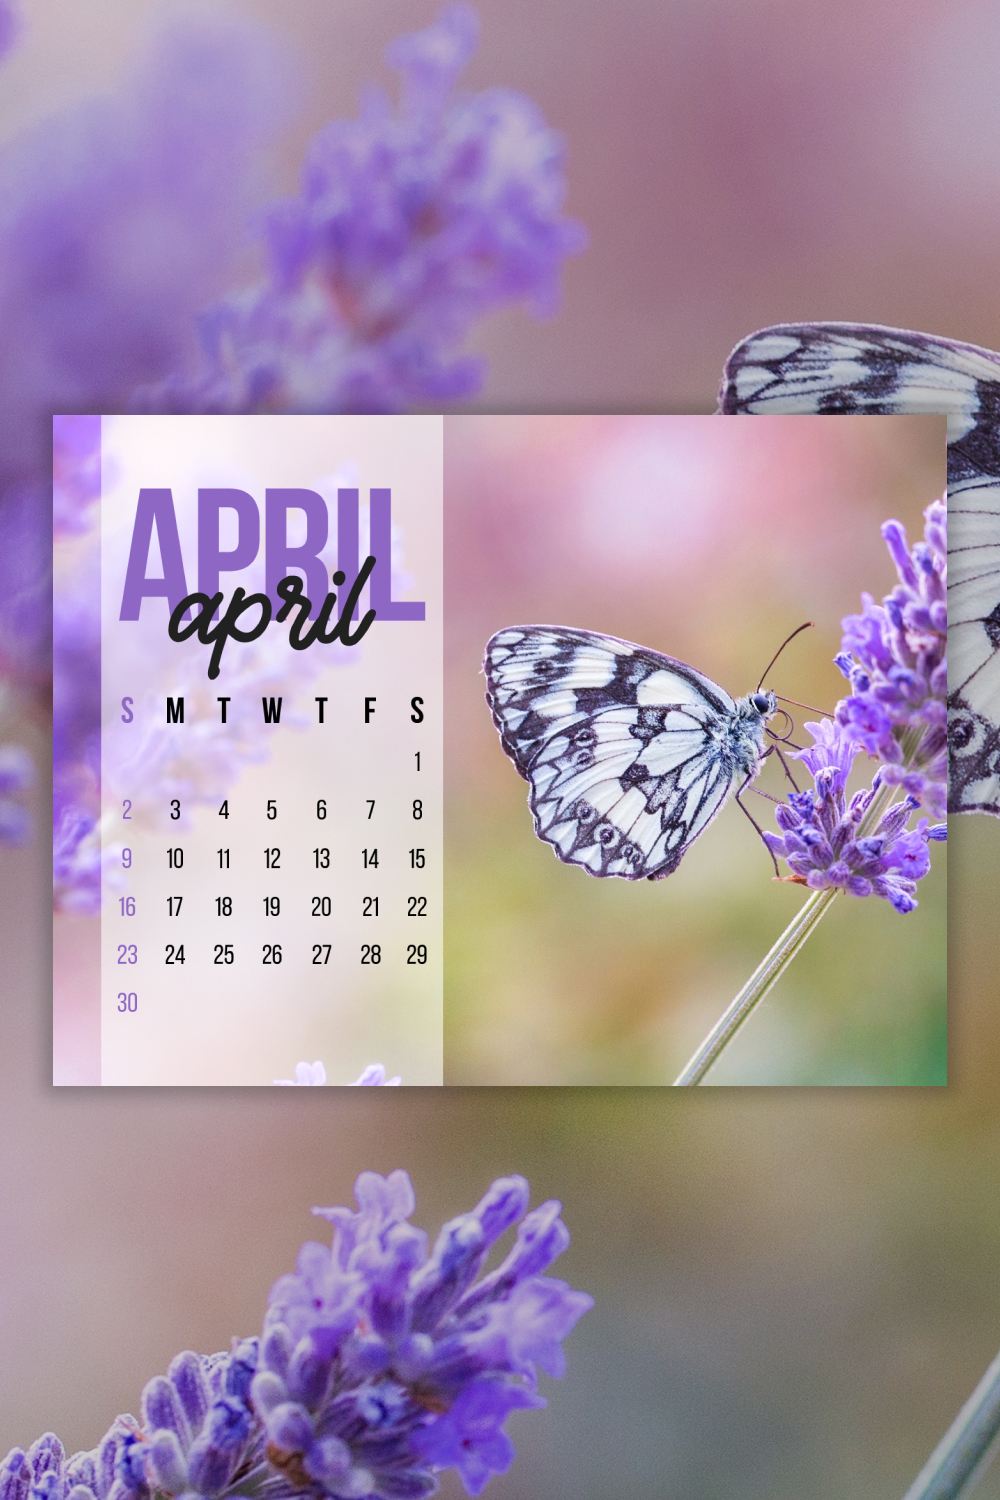 Calendar with a picture of a butterfly on it.